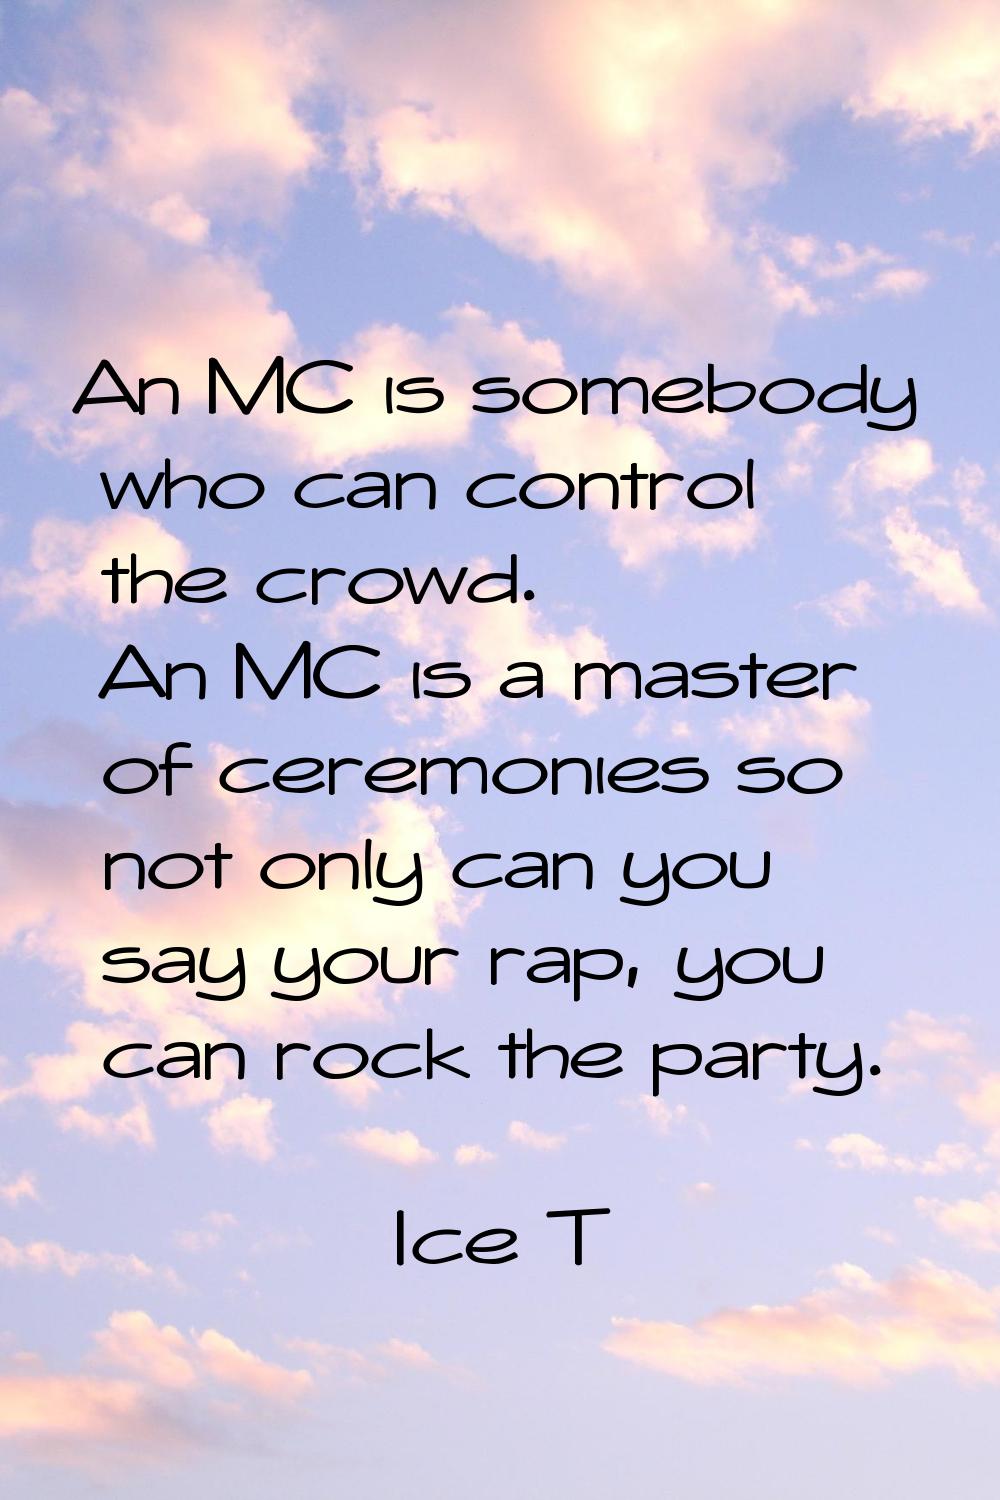 An MC is somebody who can control the crowd. An MC is a master of ceremonies so not only can you sa